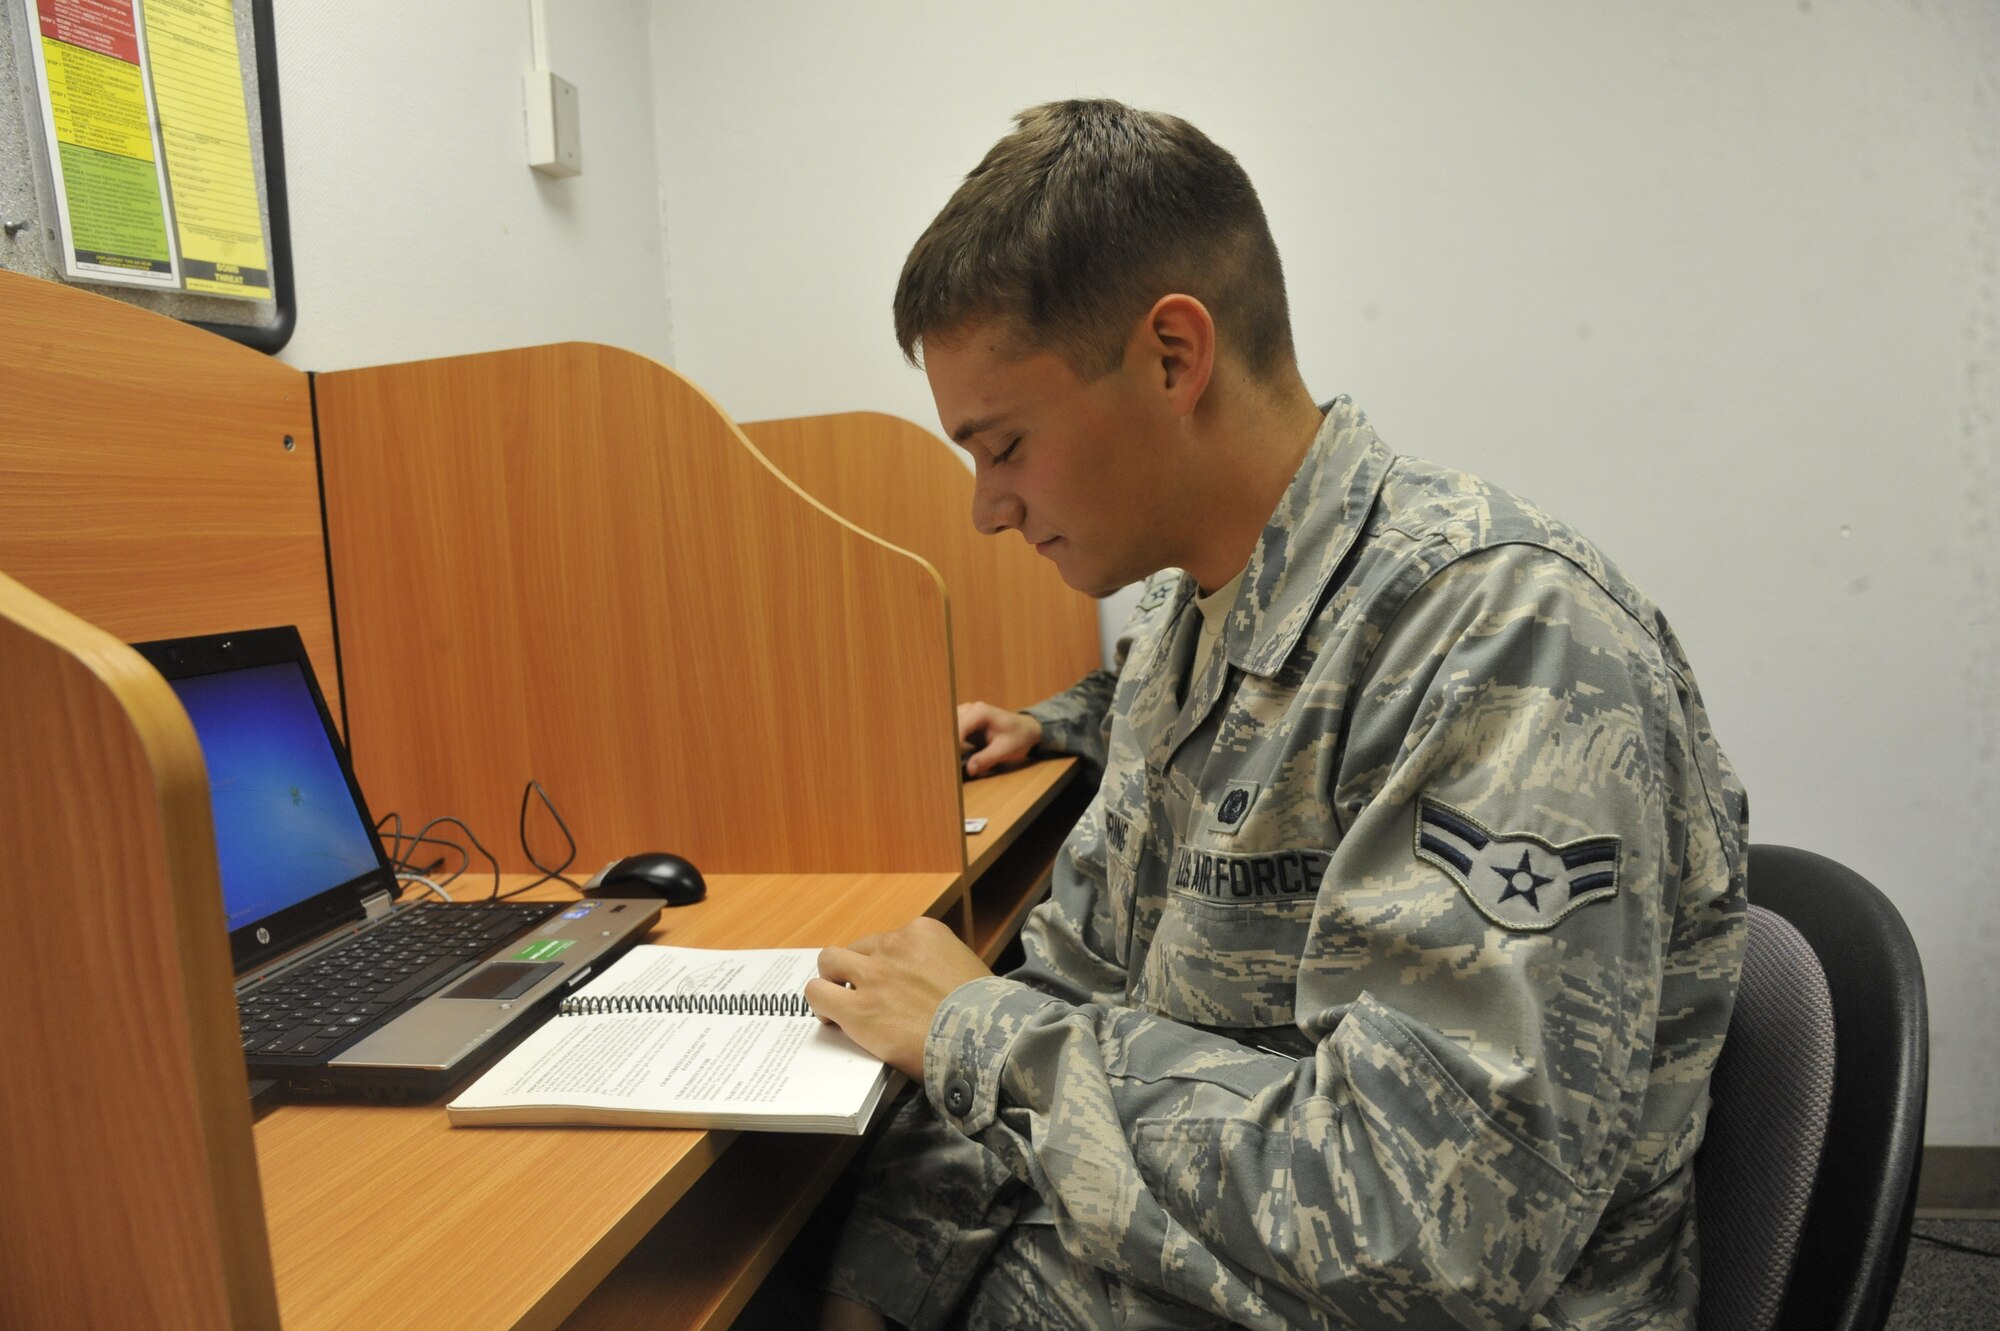 U.S. Air Force Airman 1st Class Austin Goebring, 442ndh Security Forces Squadron response force member, studies security forces manual at Whiteman Air Force Base, Mo., Sept. 19, 2013. As a reservist, Goebring works with the 509th Security Forces Squadron to complete his Career Development Courses to advance further in his careers. (U.S. Air Force photo by Airman 1st Class Keenan Berry/Released)